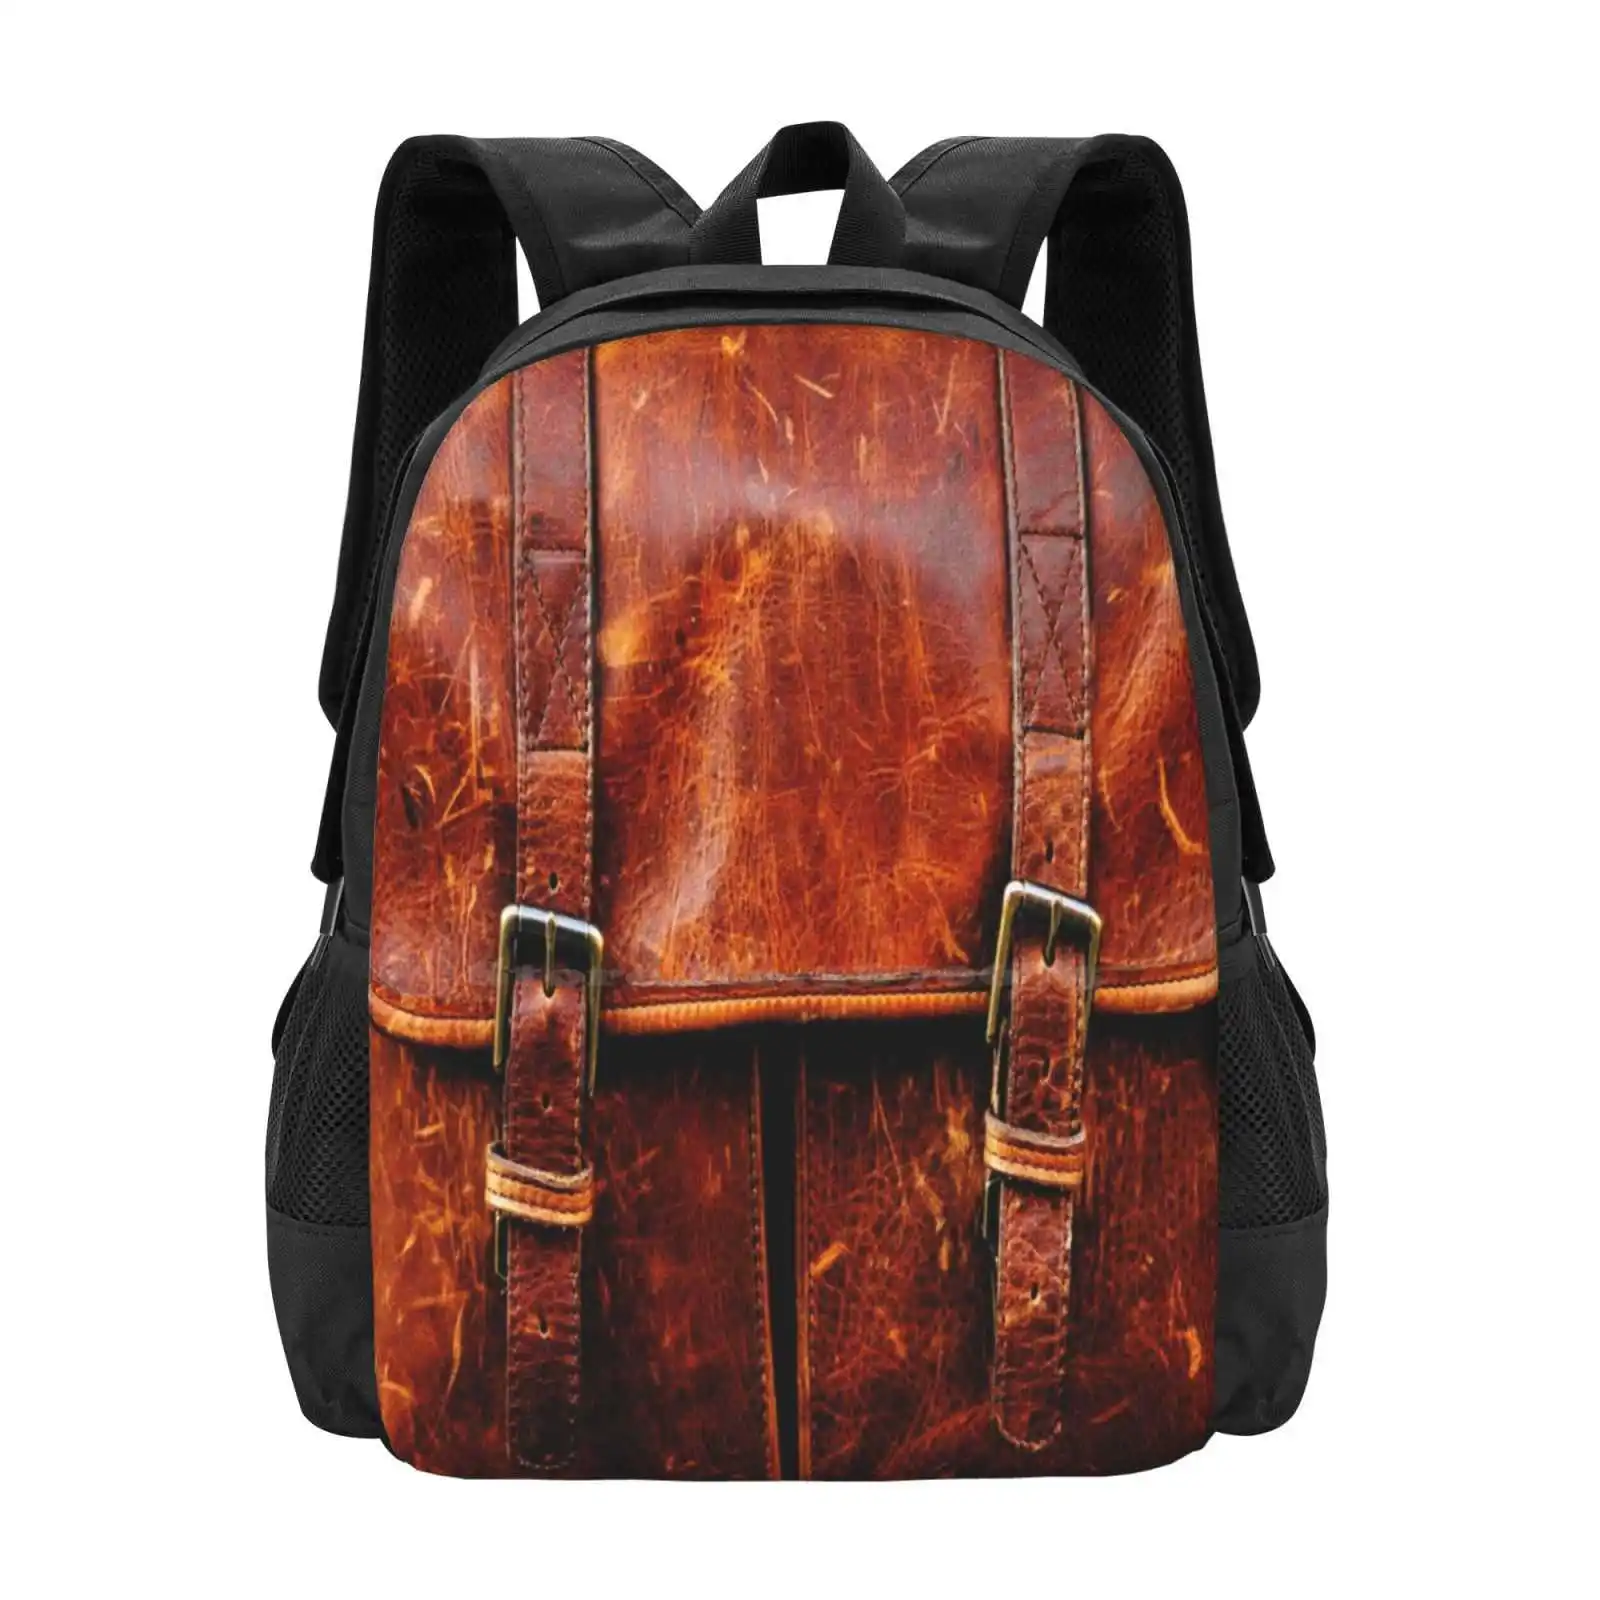 

Leather Backpacks For School Teenagers Girls Travel Bags Abstract Pop Art Vintage Retro Leather Brown Background Textures